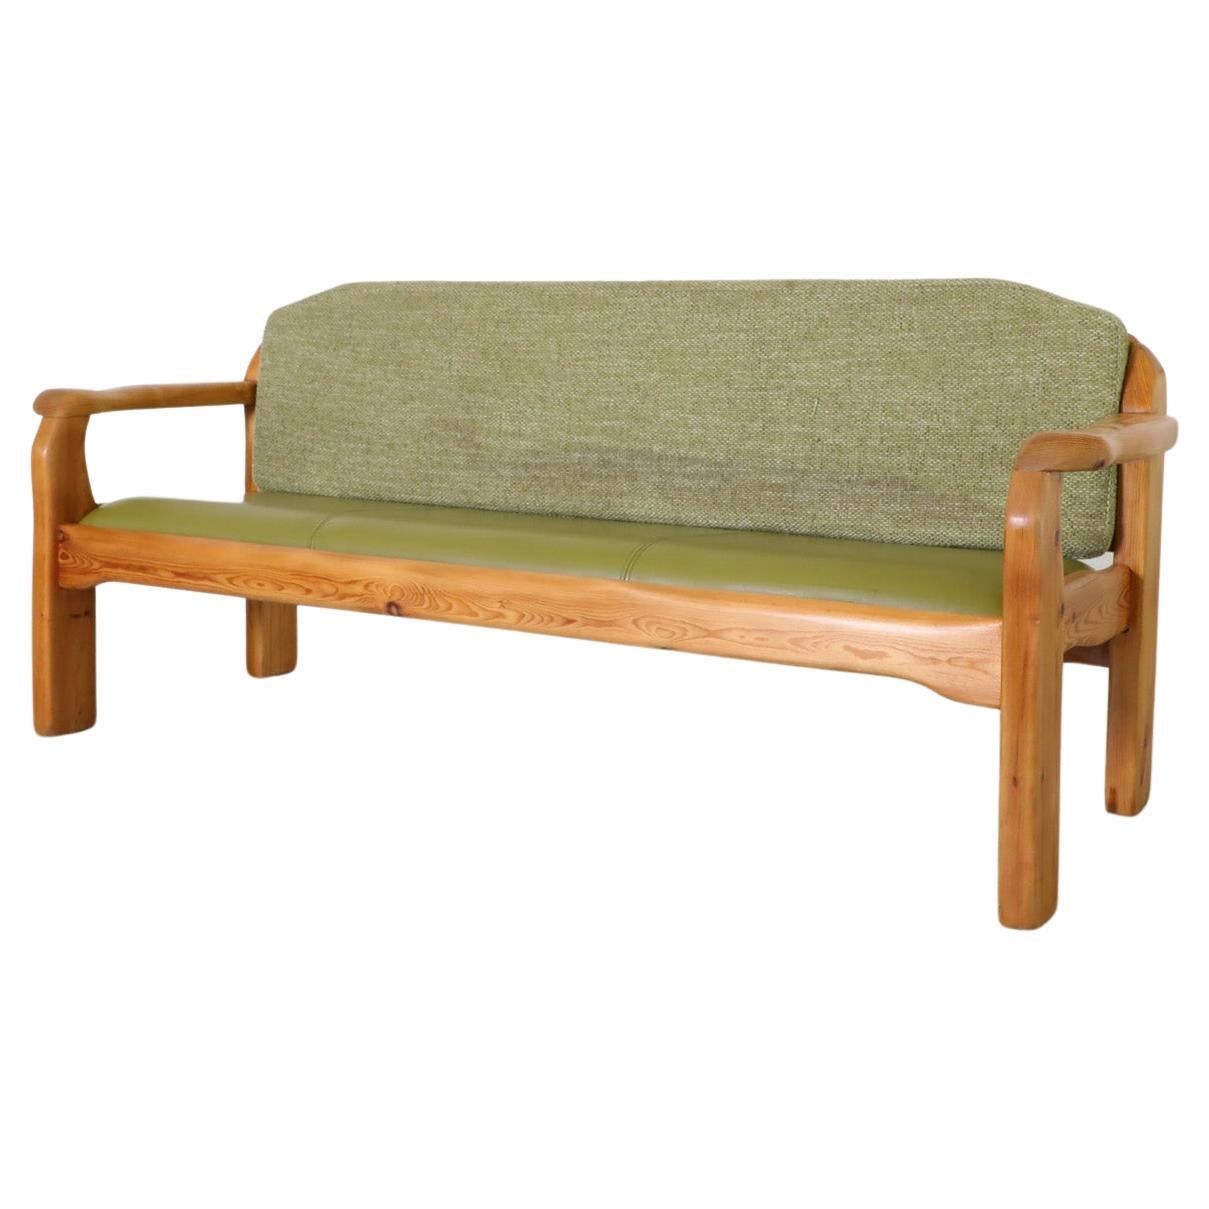 Ate van Apeldoorn Inspired Pine Bench with Green Cushions & Hand Carved Details For Sale